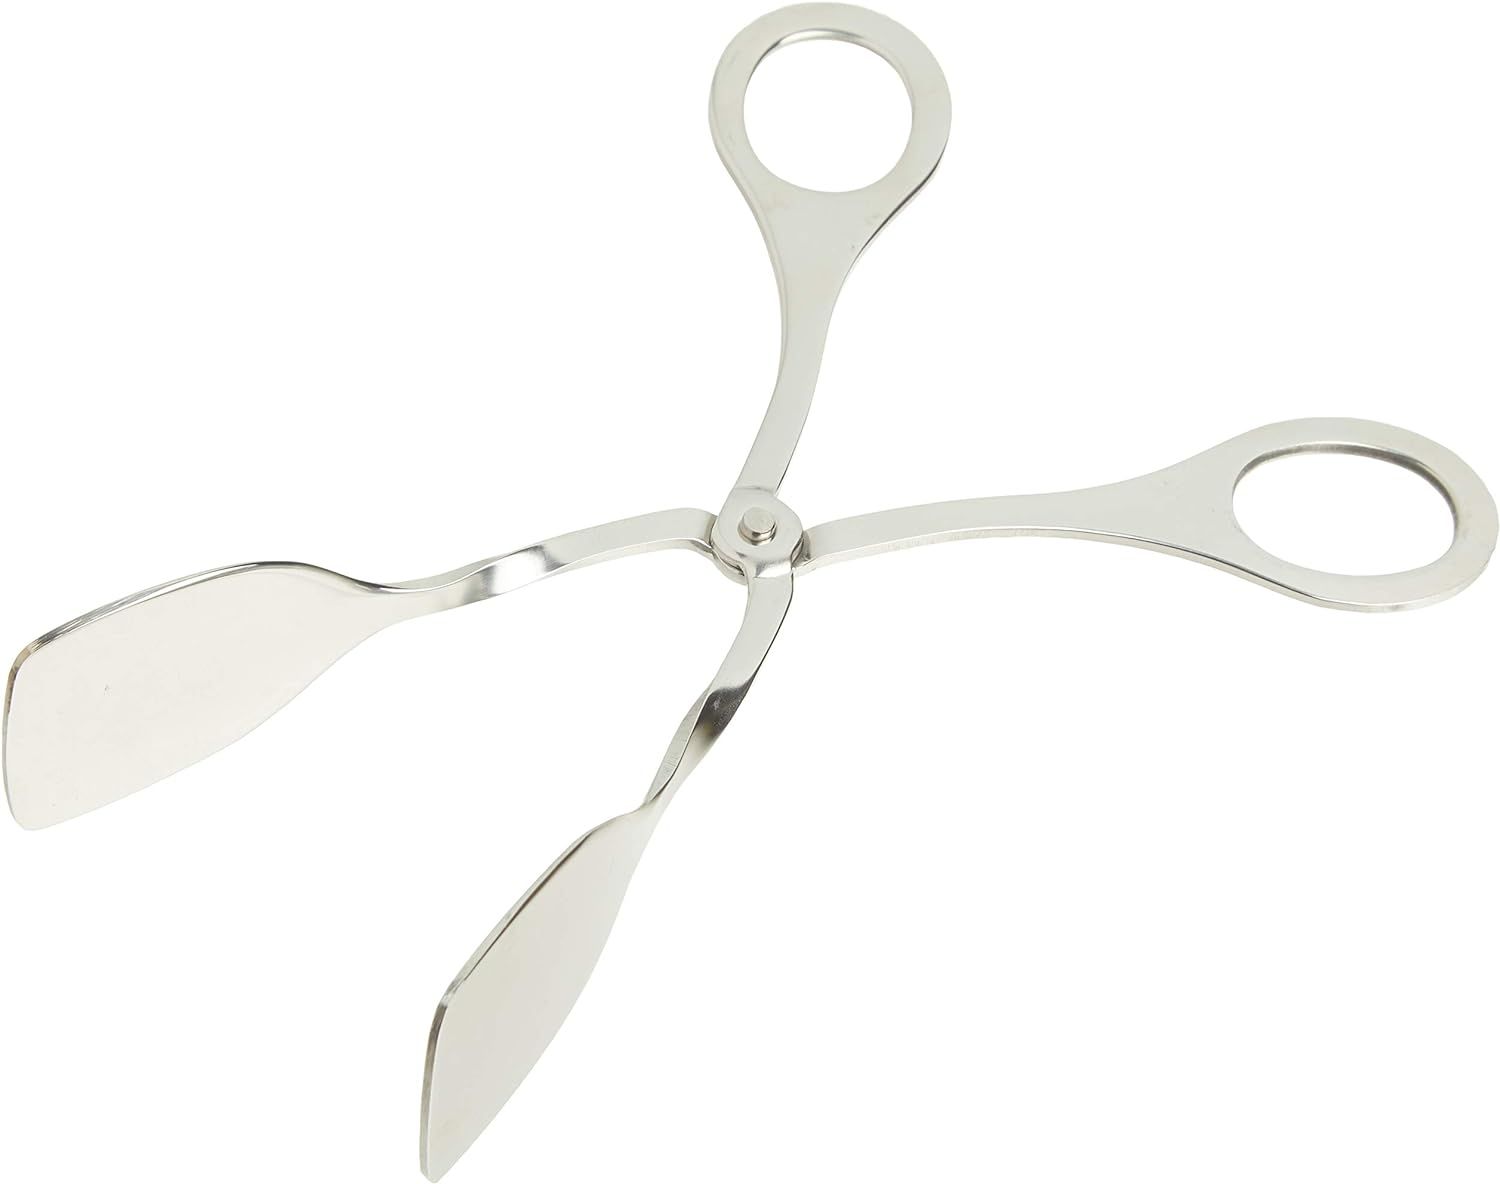 Norpro, Silver Stainless Steel Serving Tongs, 7.5 INCH | Amazon (US)